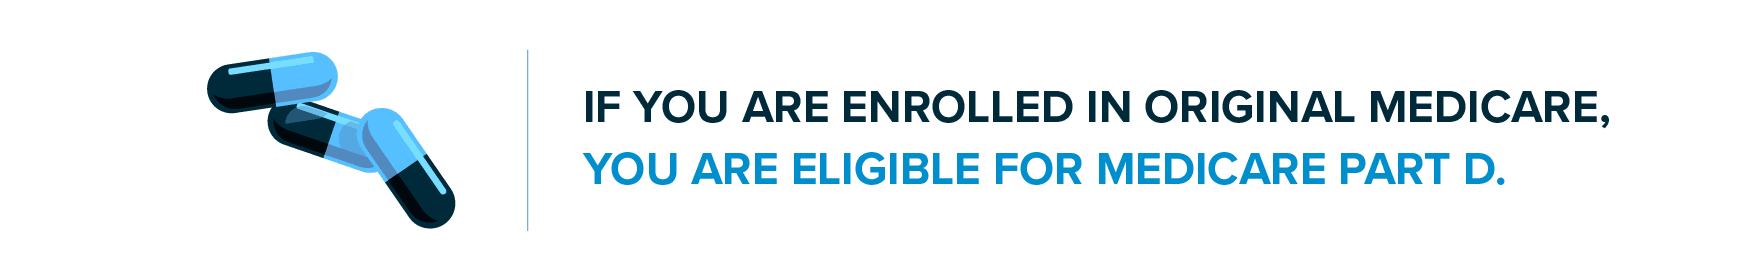 If you are enrolled in original Medicare, you are eligible for Medicare Part D.